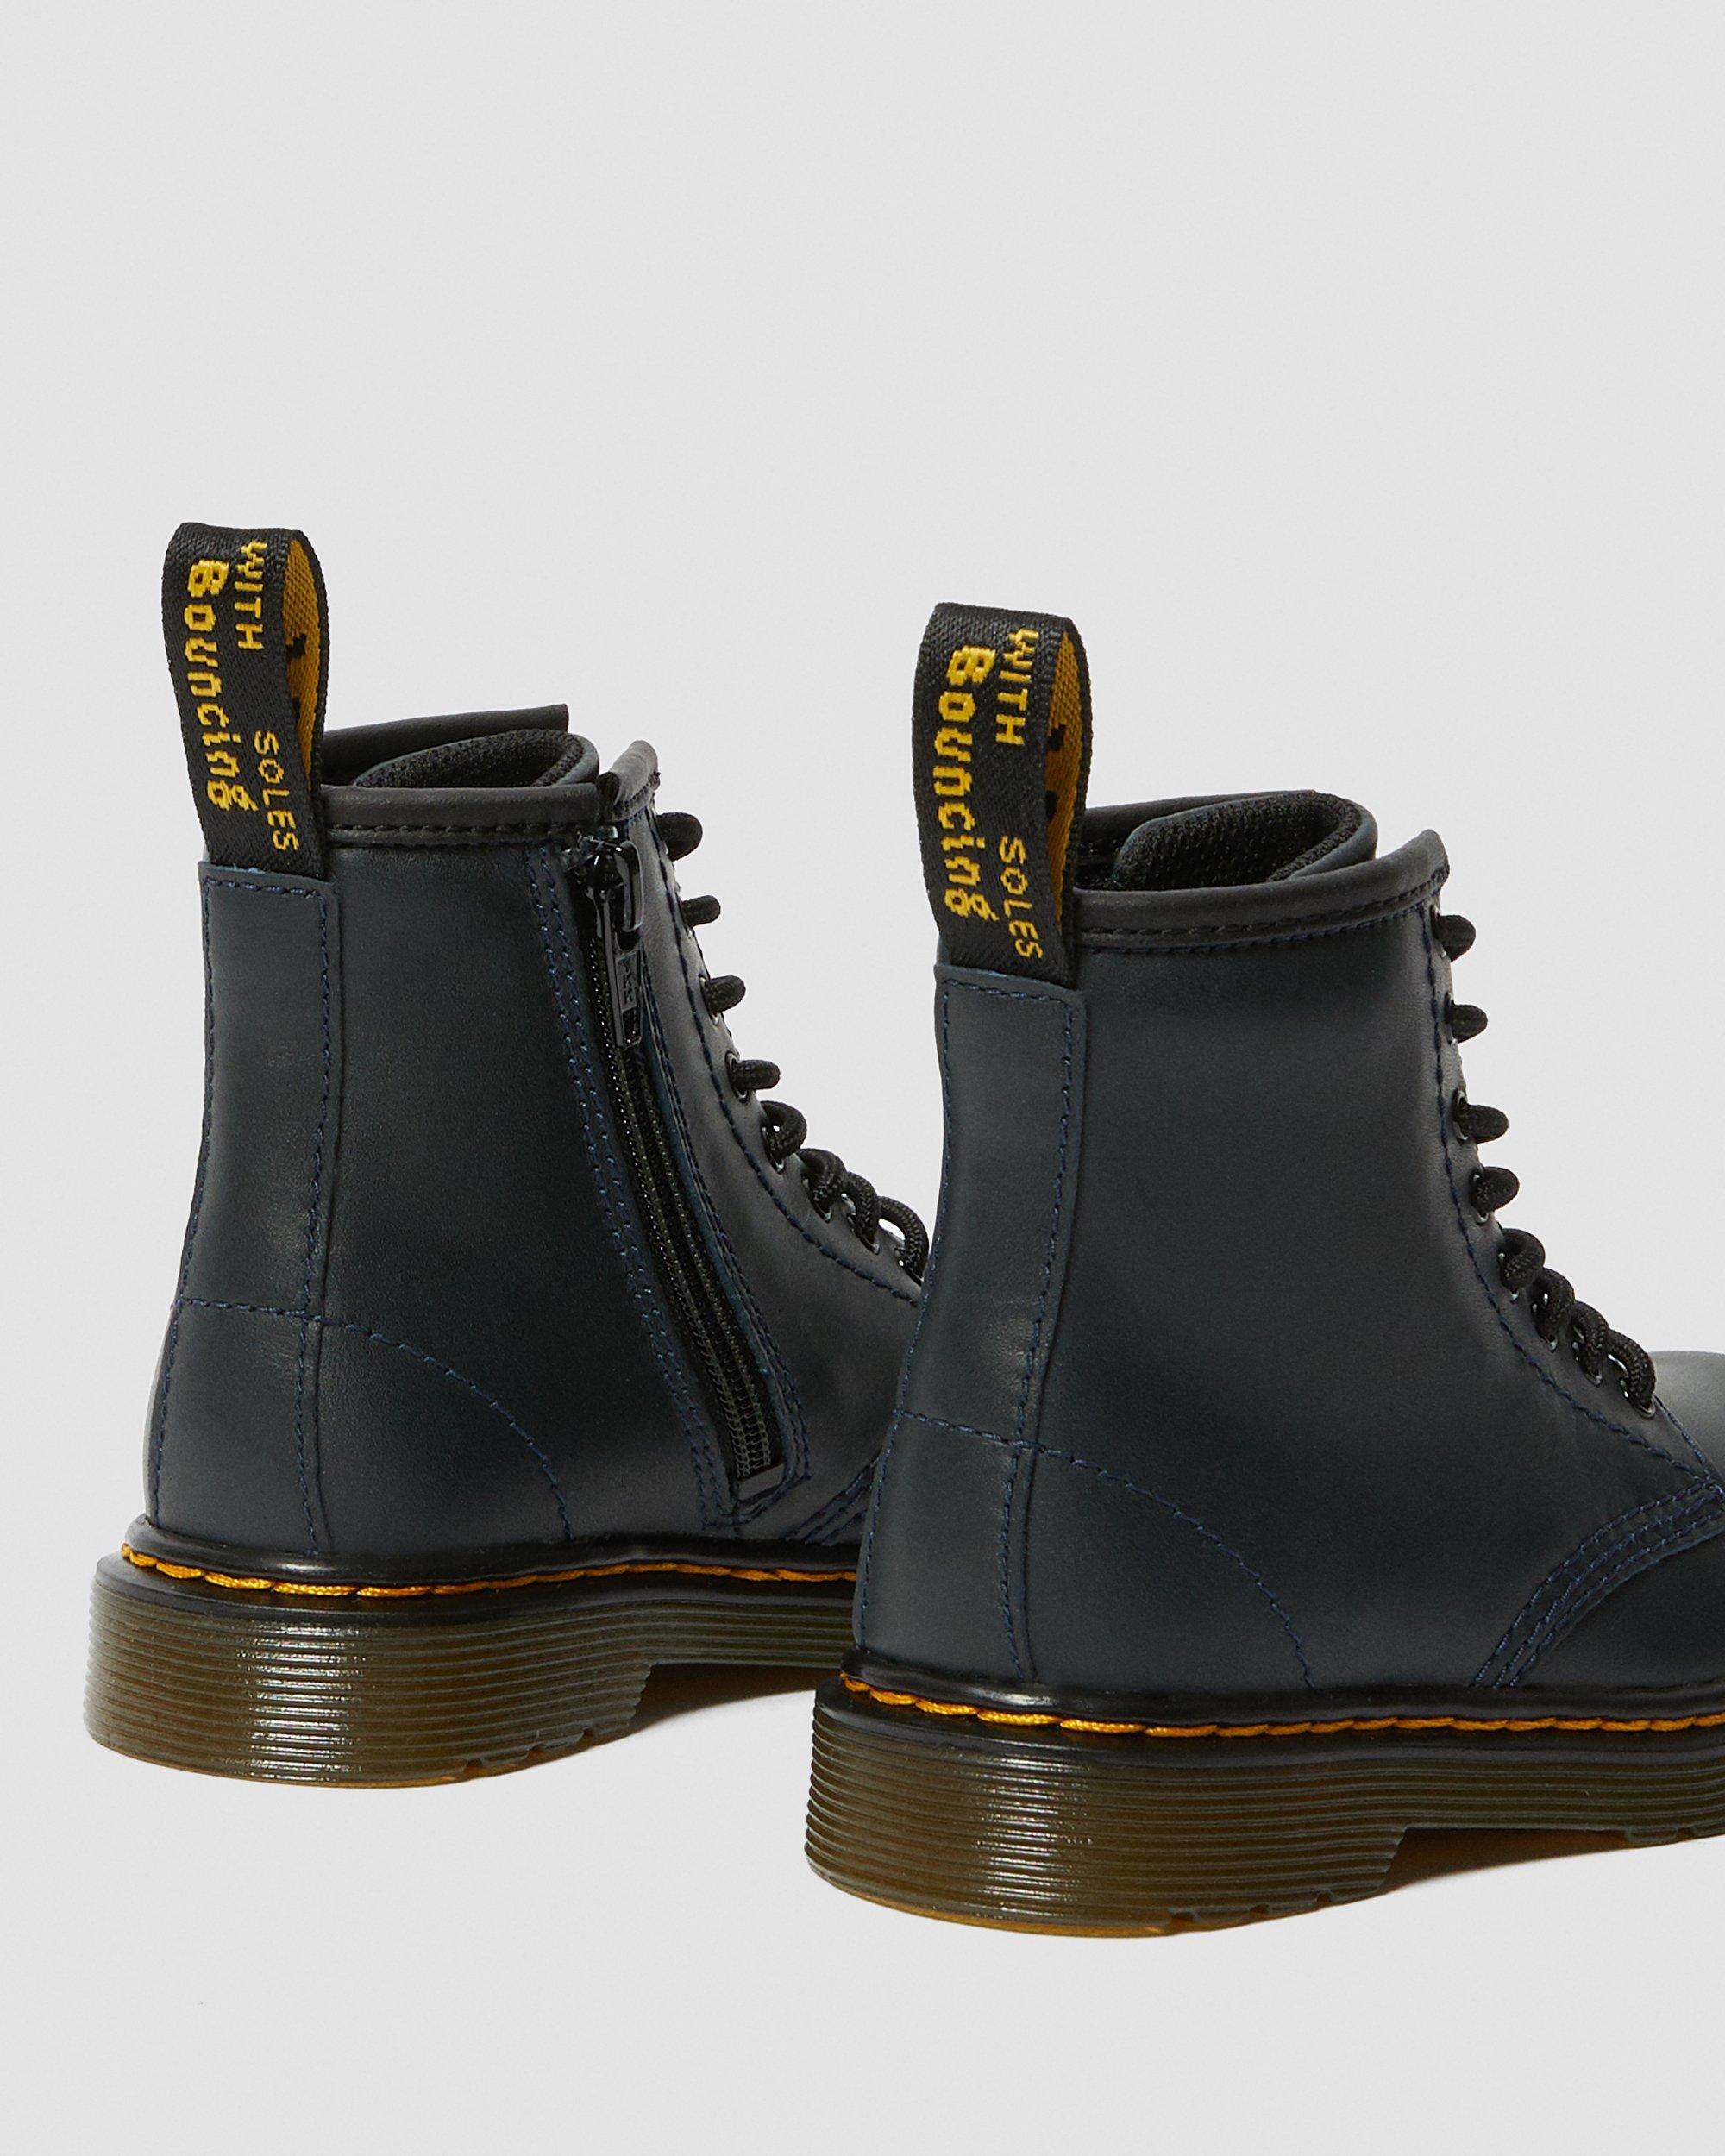 TODDLER 1460 LEATHER ANKLE BOOTS | Dr. Martens